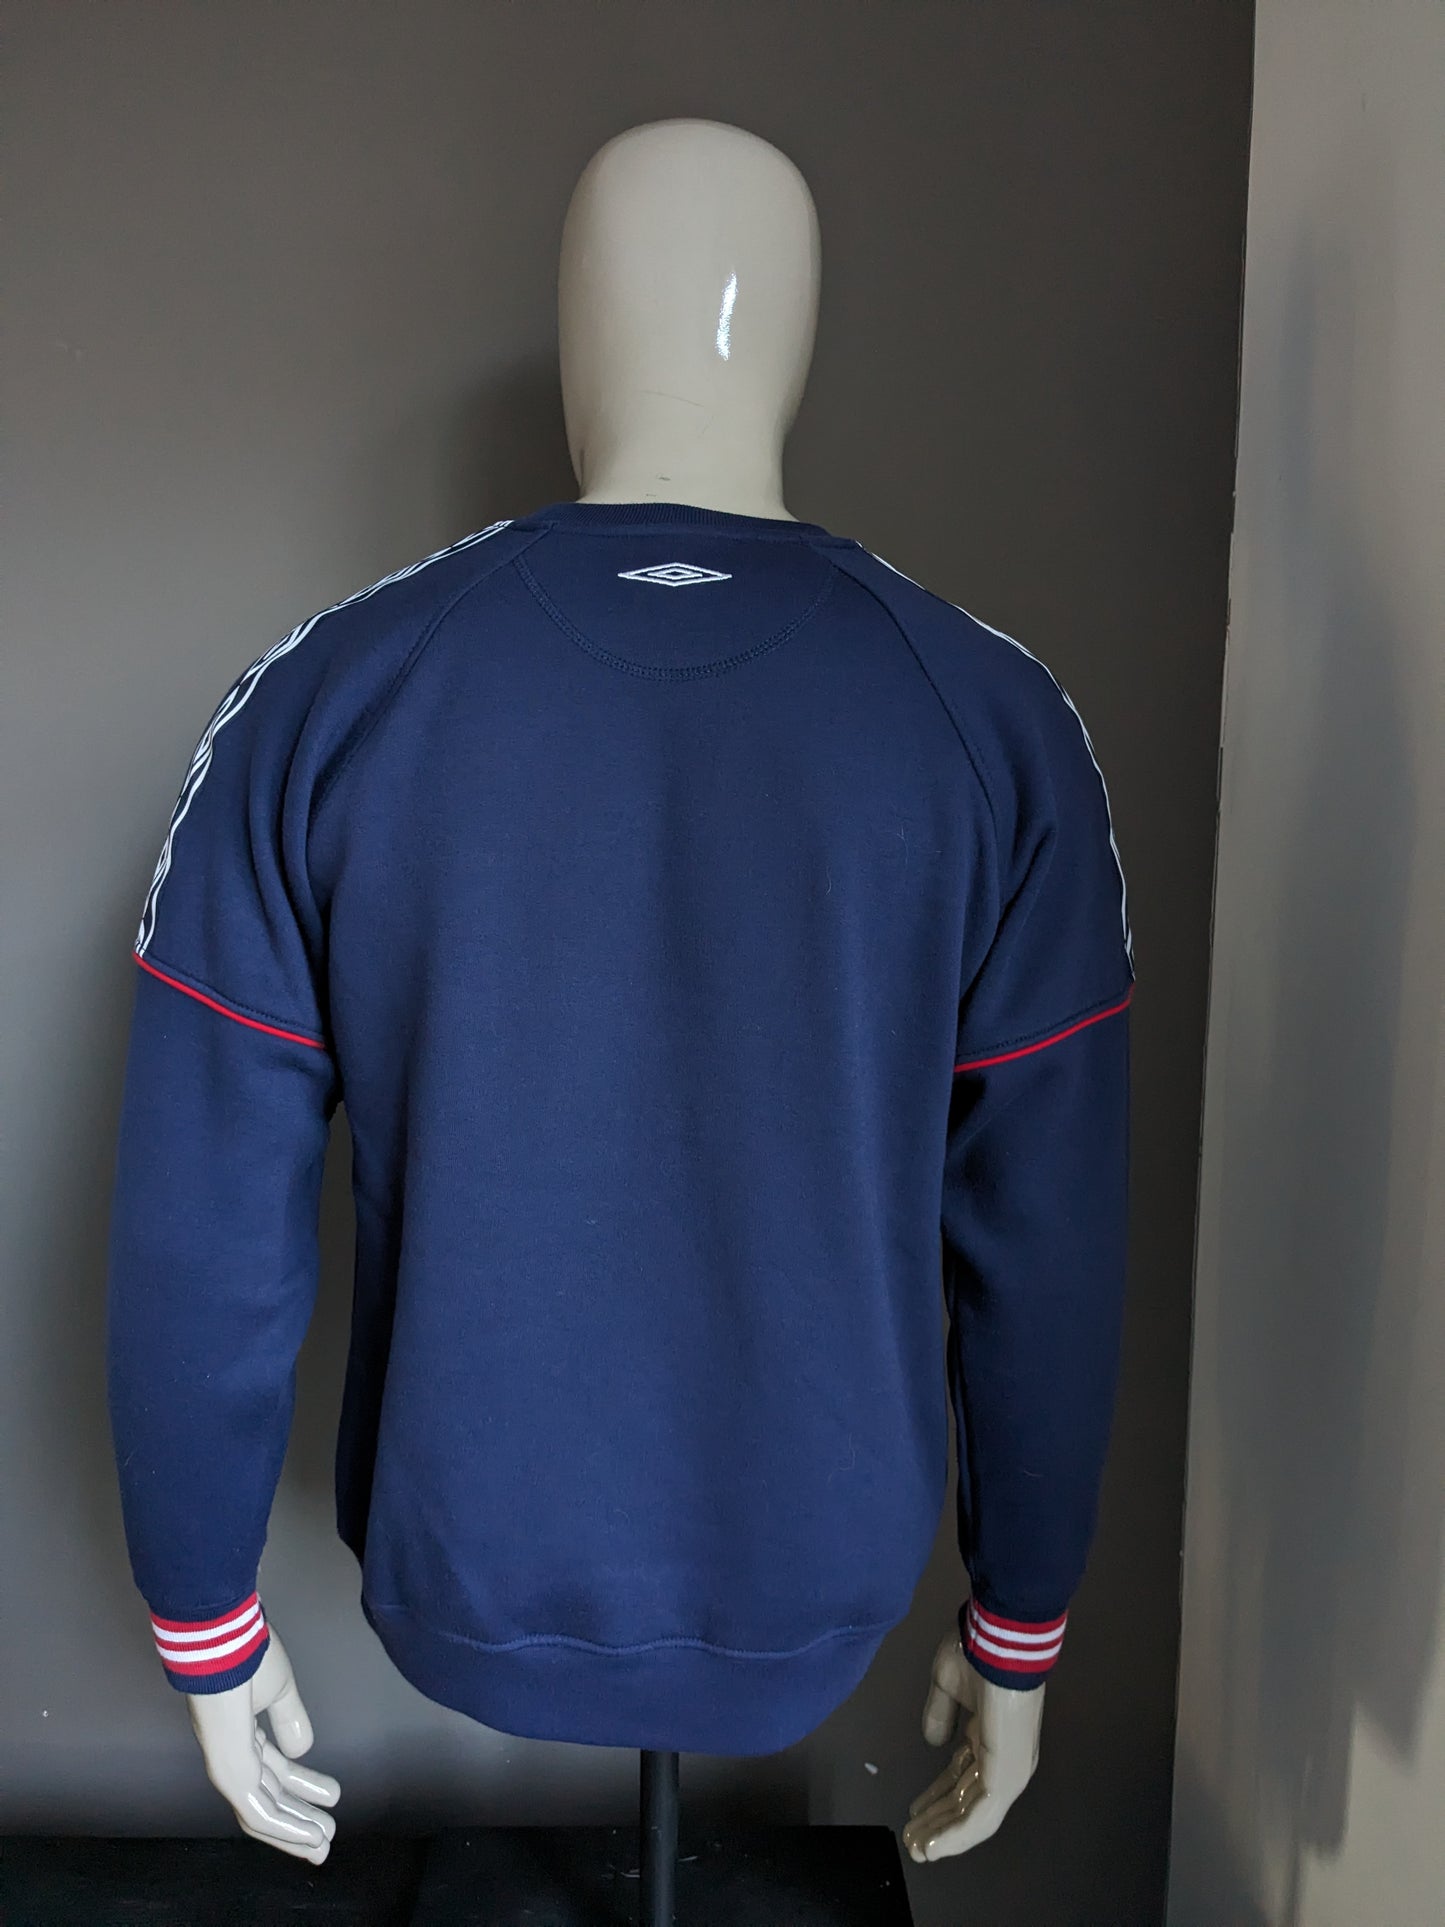 Vintage umbro sweater. Dark blue with applications on the sleeves. Size L.